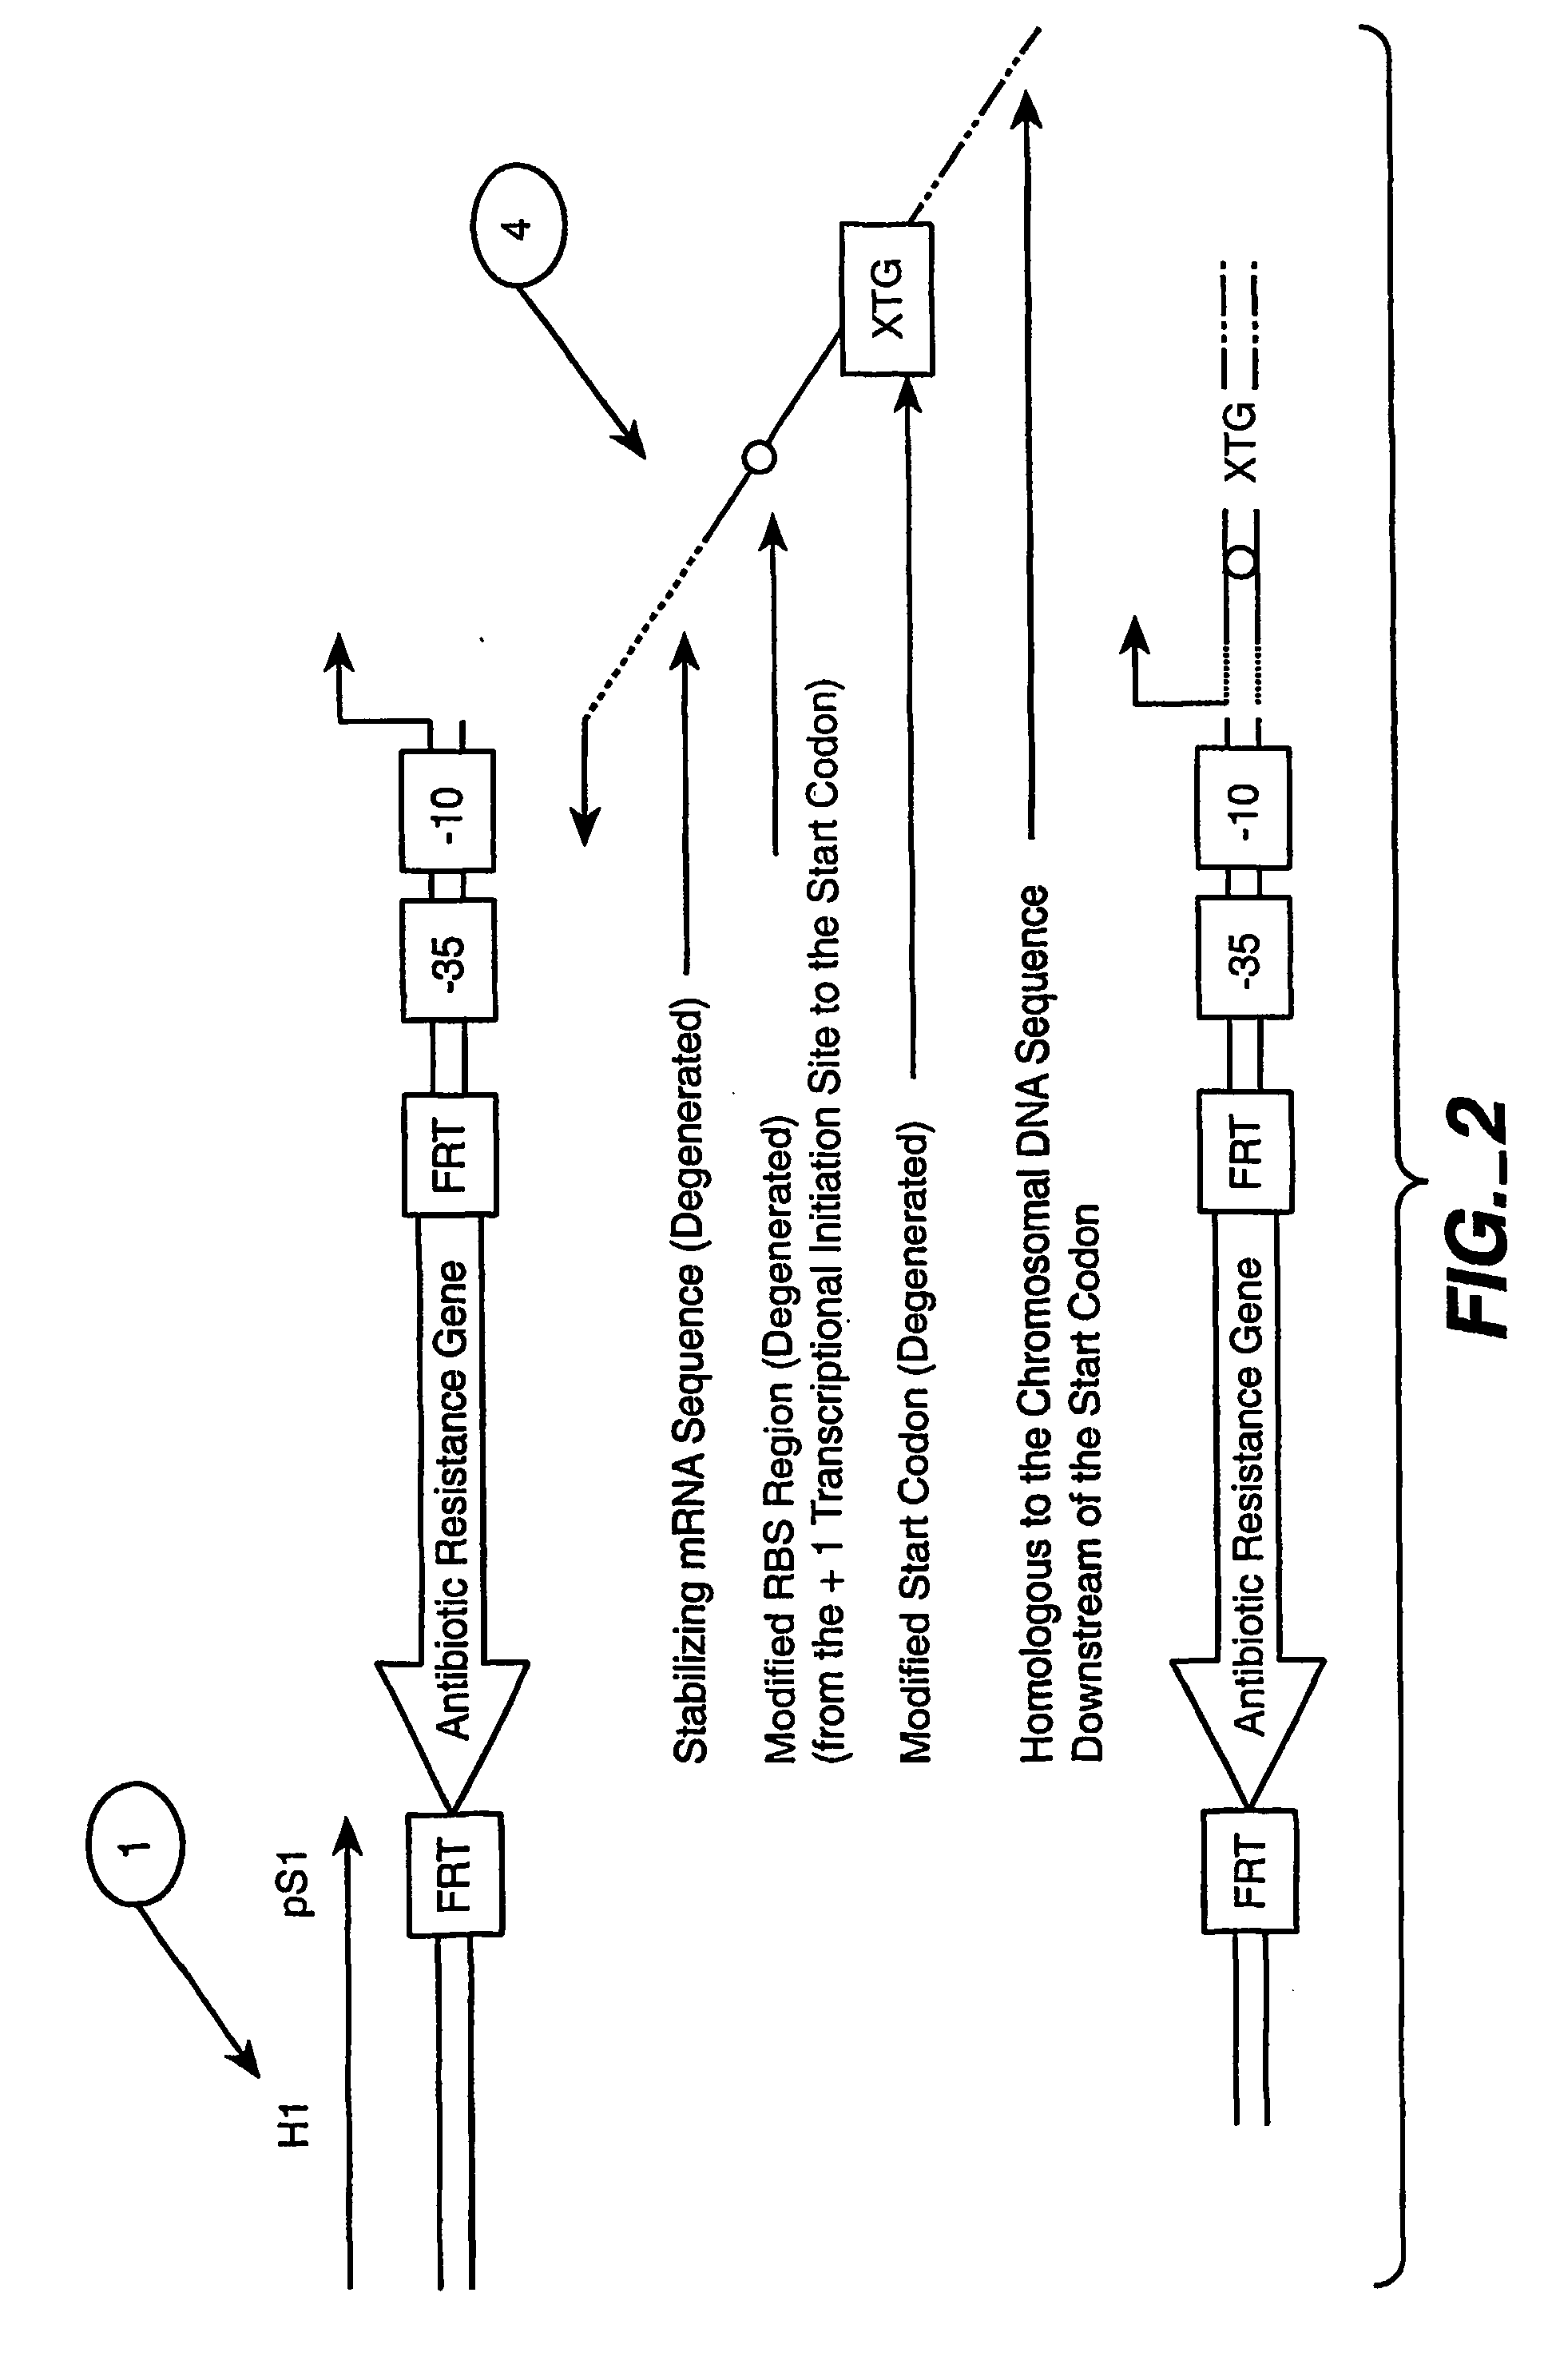 Method of creating a library of bacterial clones with varying levels of gene expression